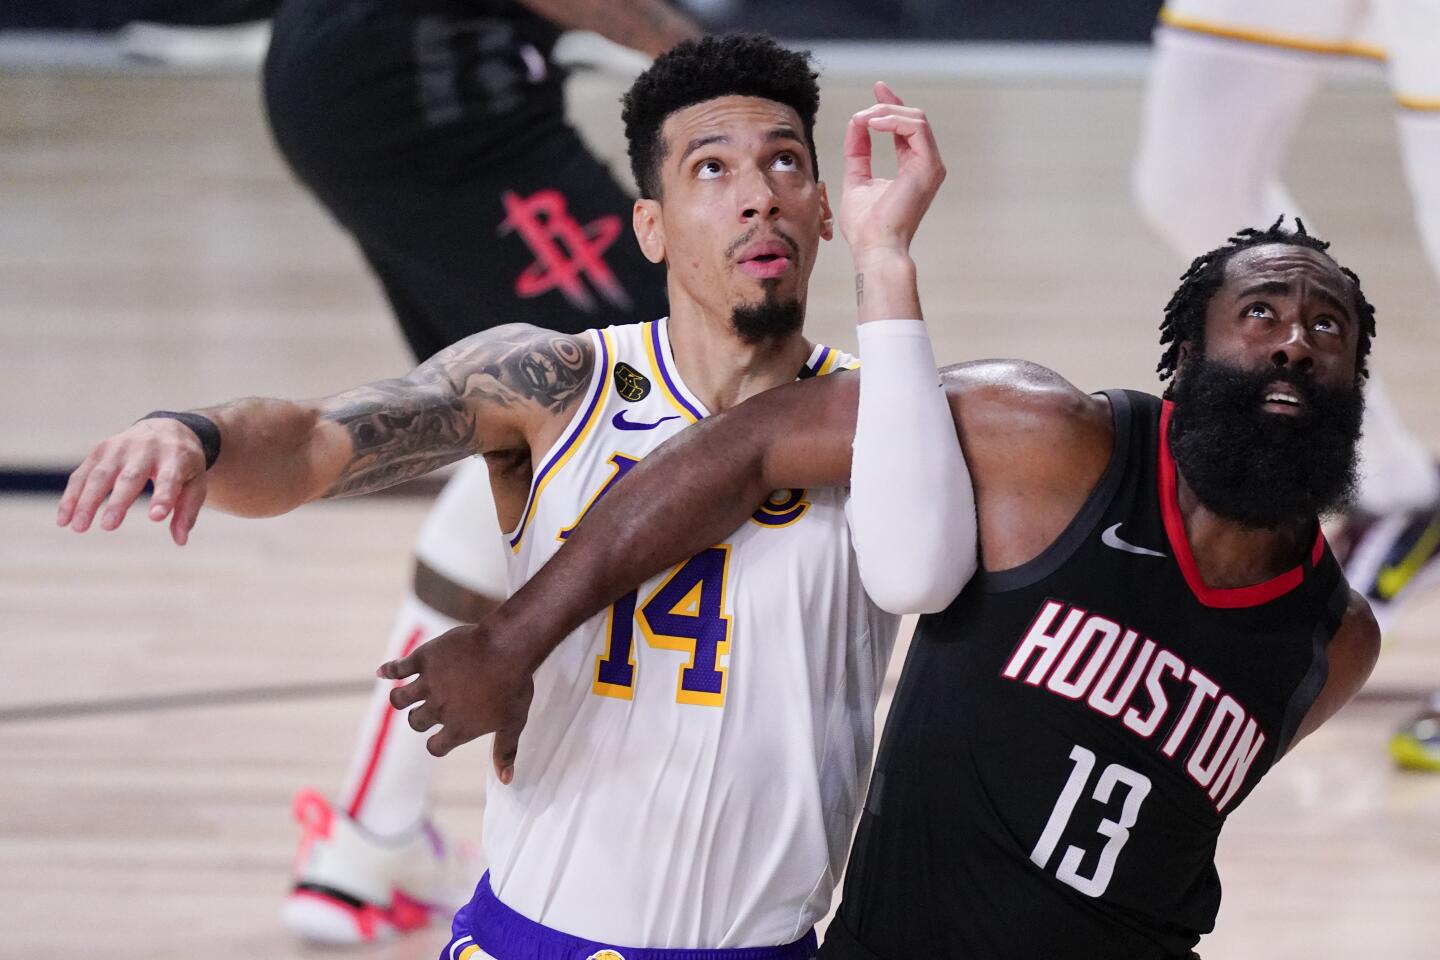 The Lakers' Danny Green, left, battles Houston's James Harden for position under the basket Saturday.